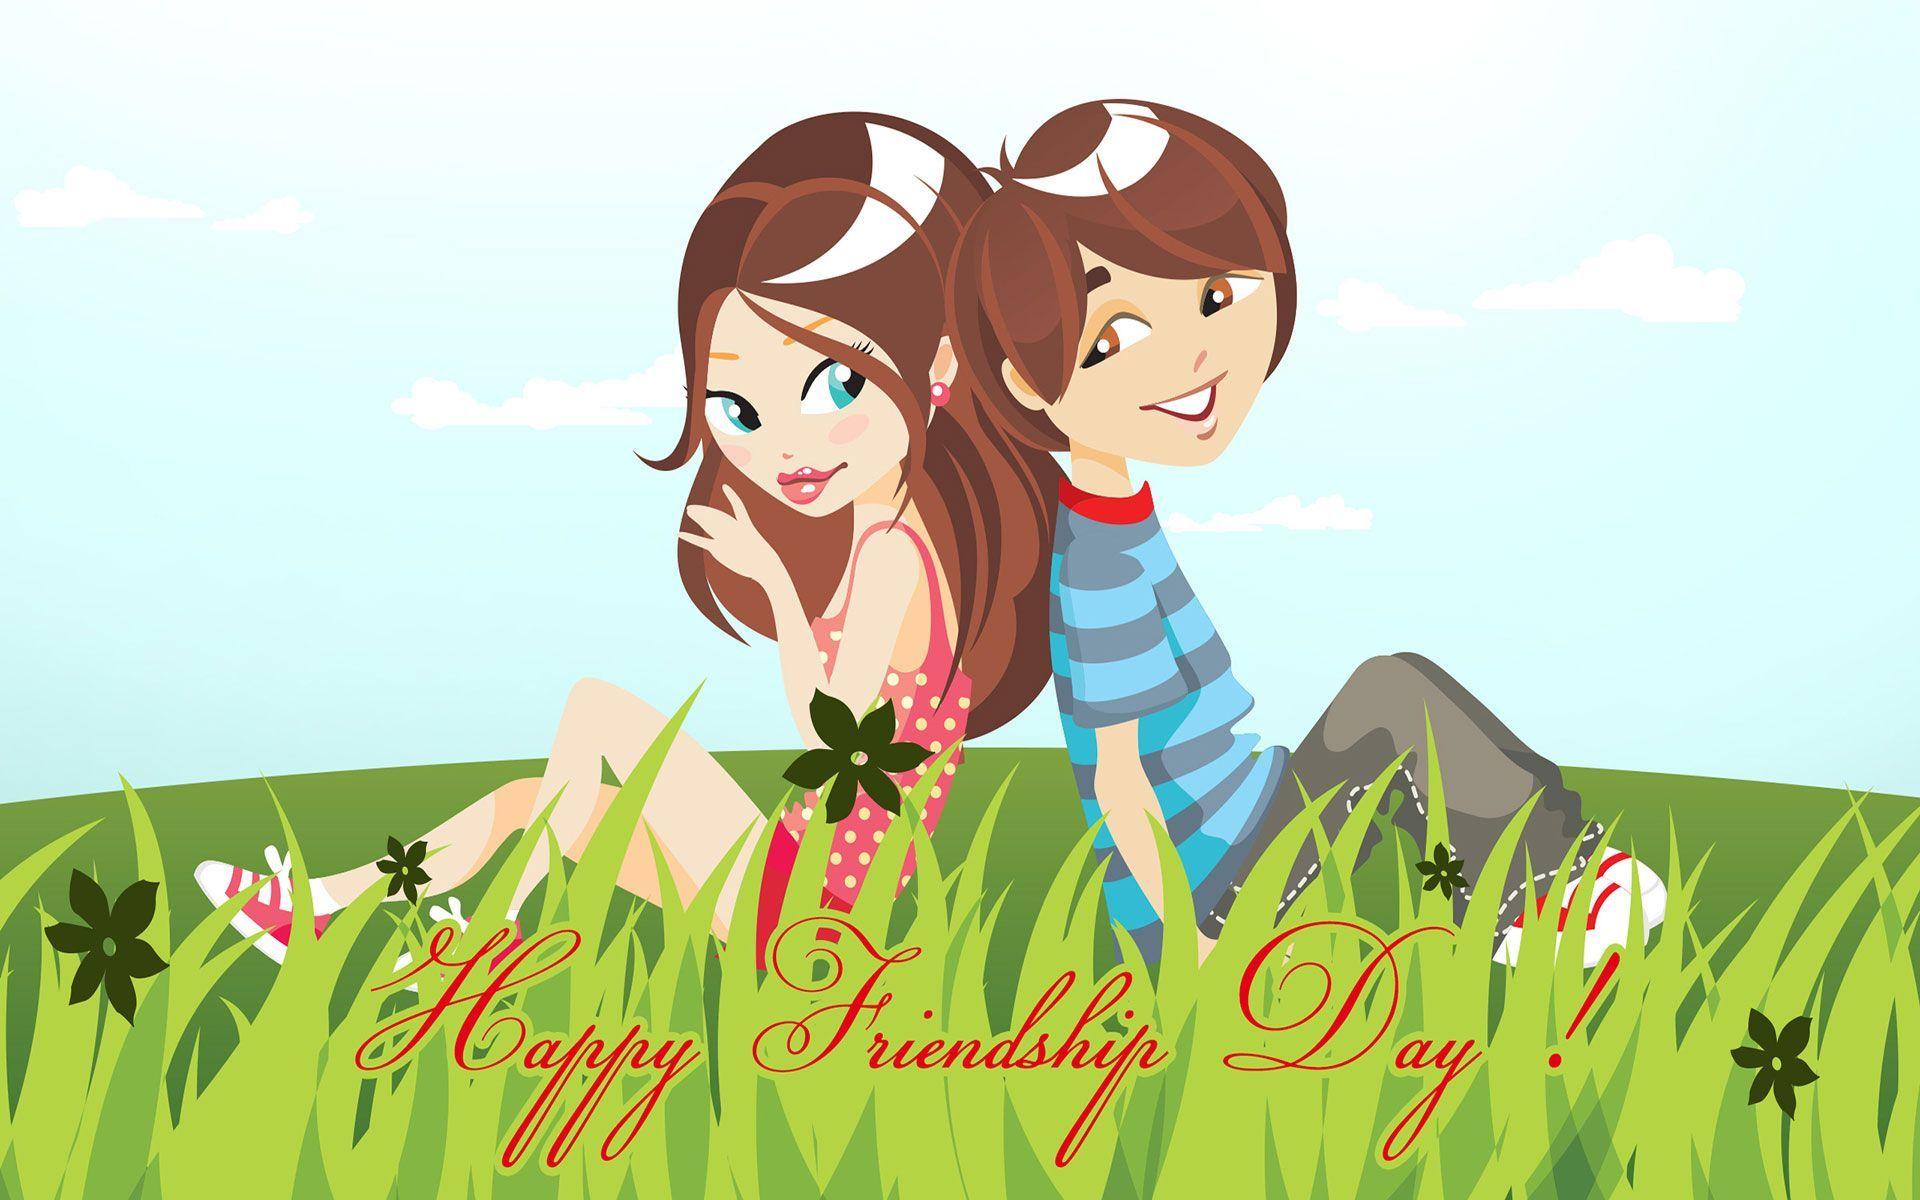 happy friendship day animated wallpaper